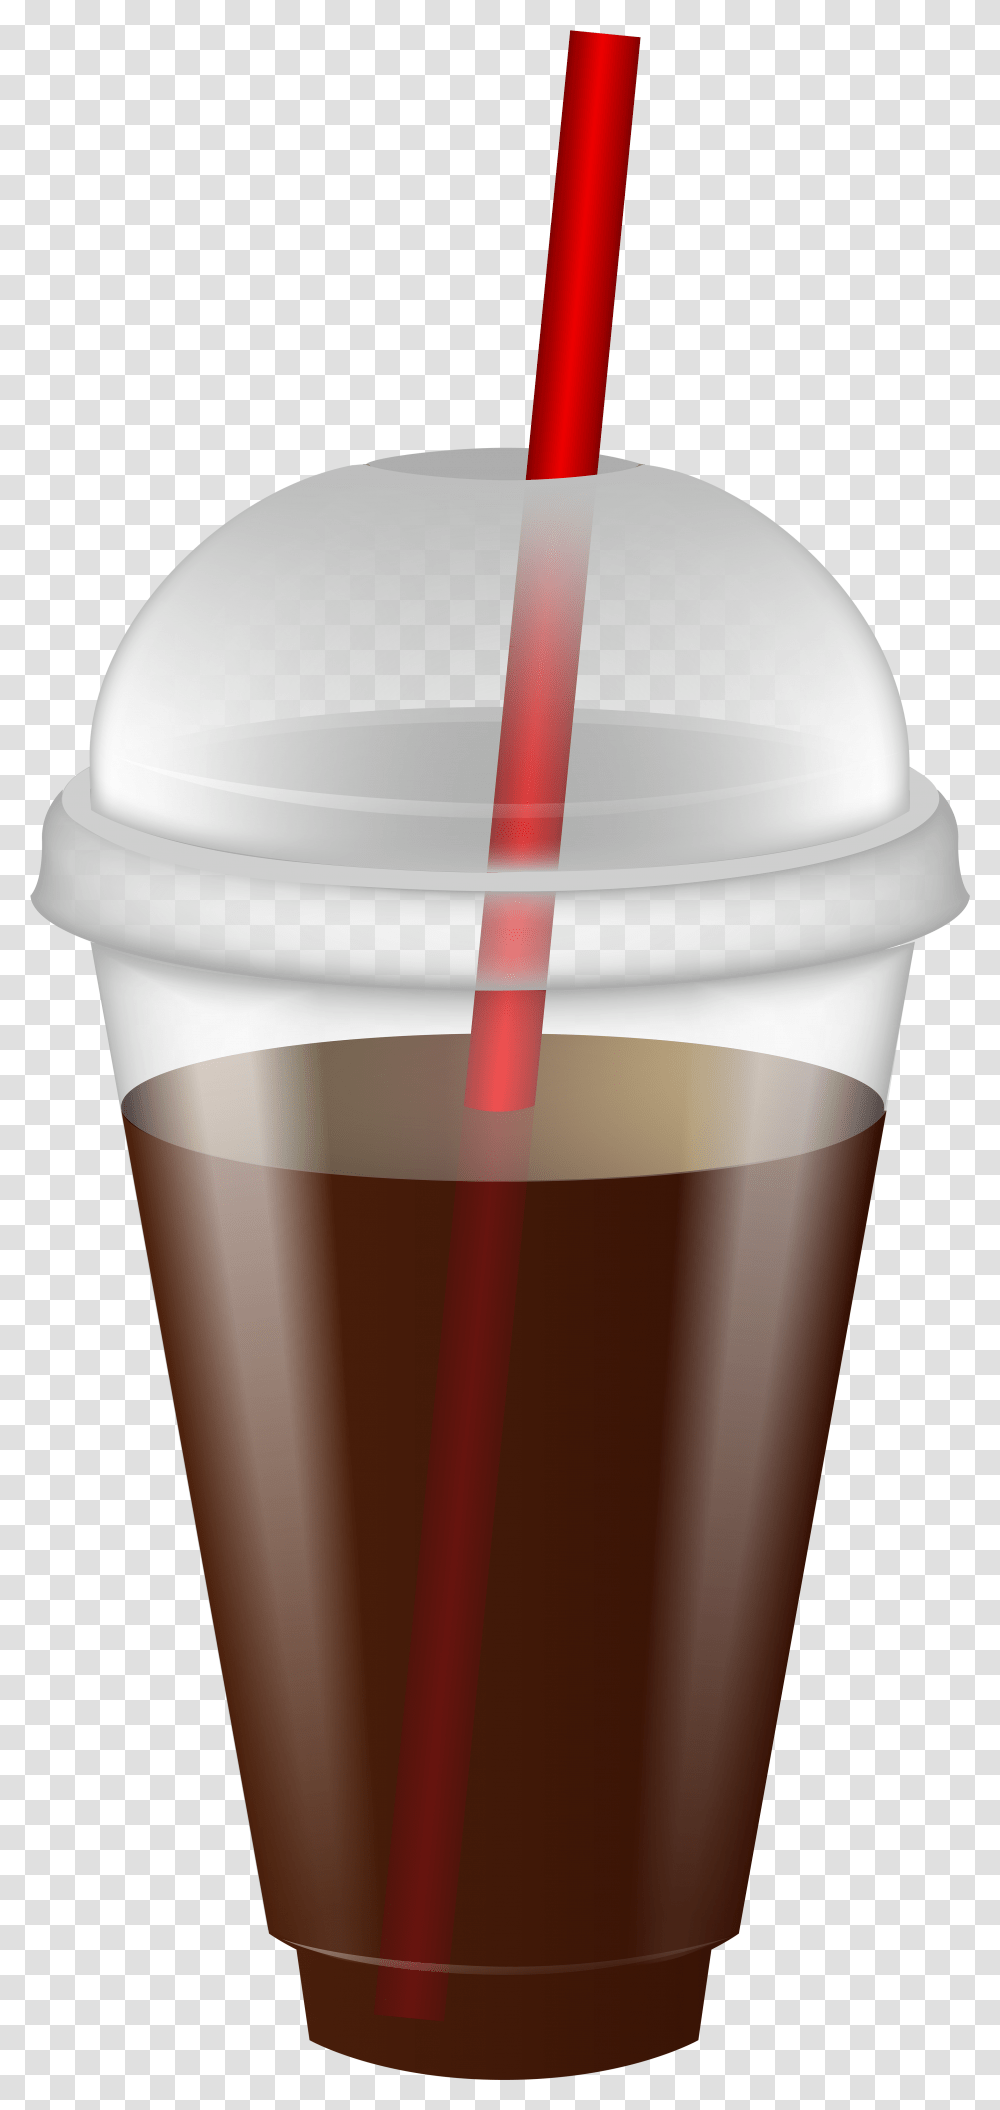 Cup Clipart Straw Drink Plastic Cup, Glass, Coffee Cup, Beverage, Soda Transparent Png